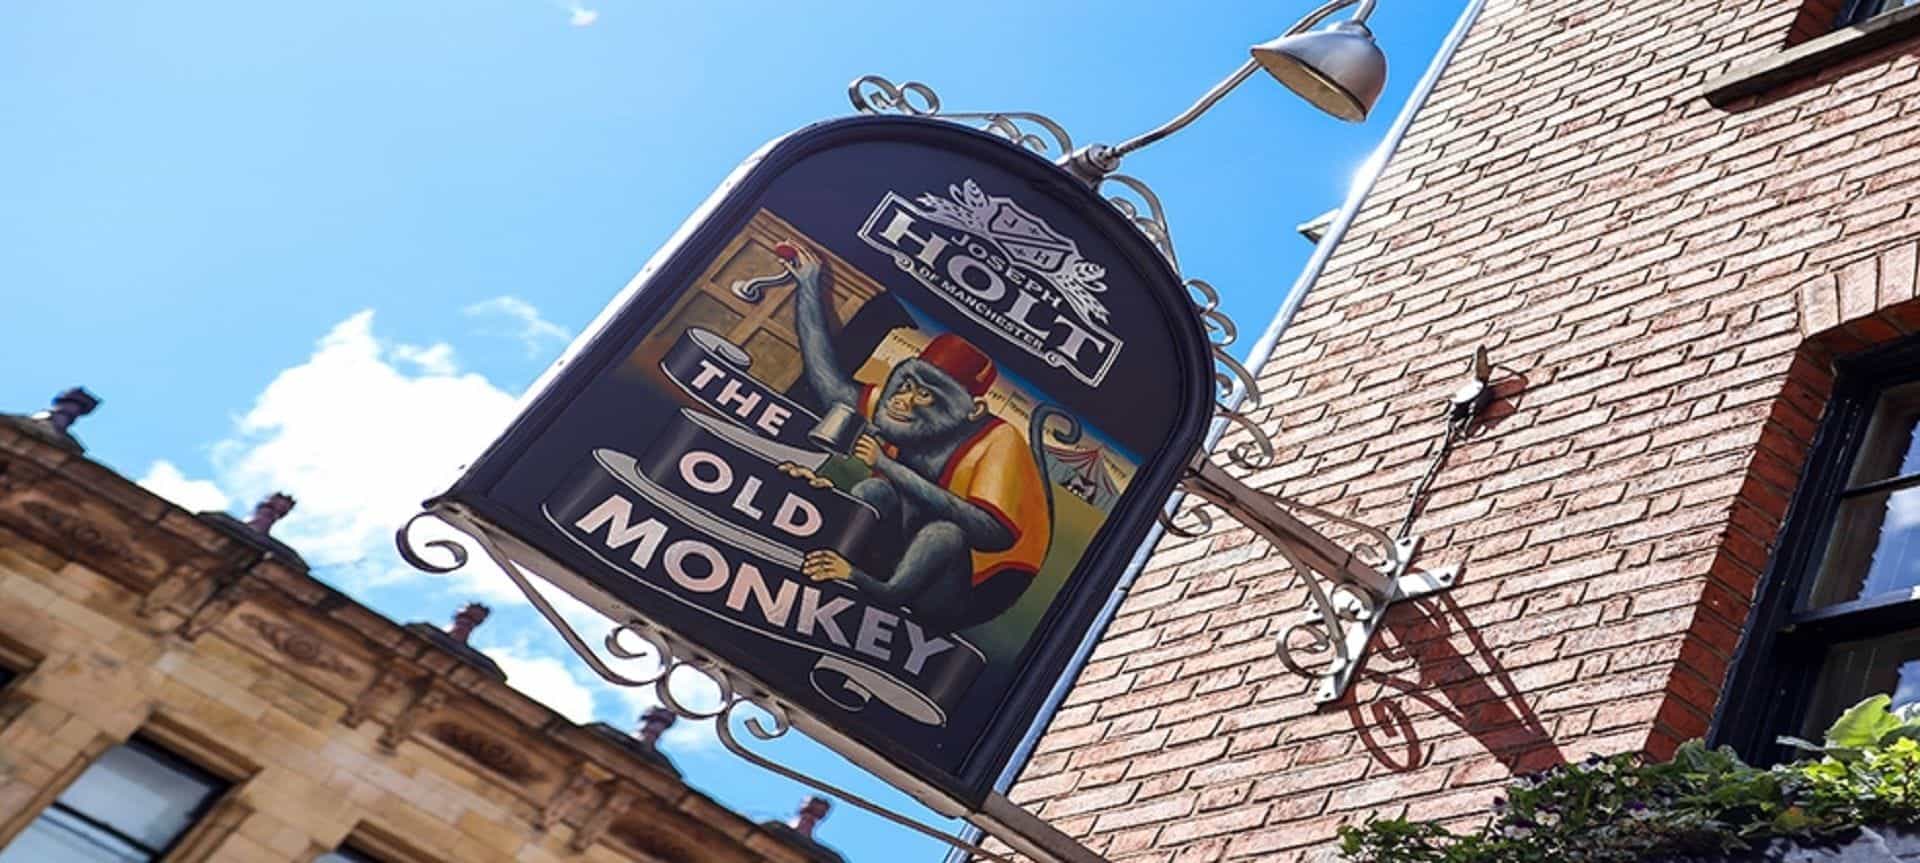 The Old Monkey in UK